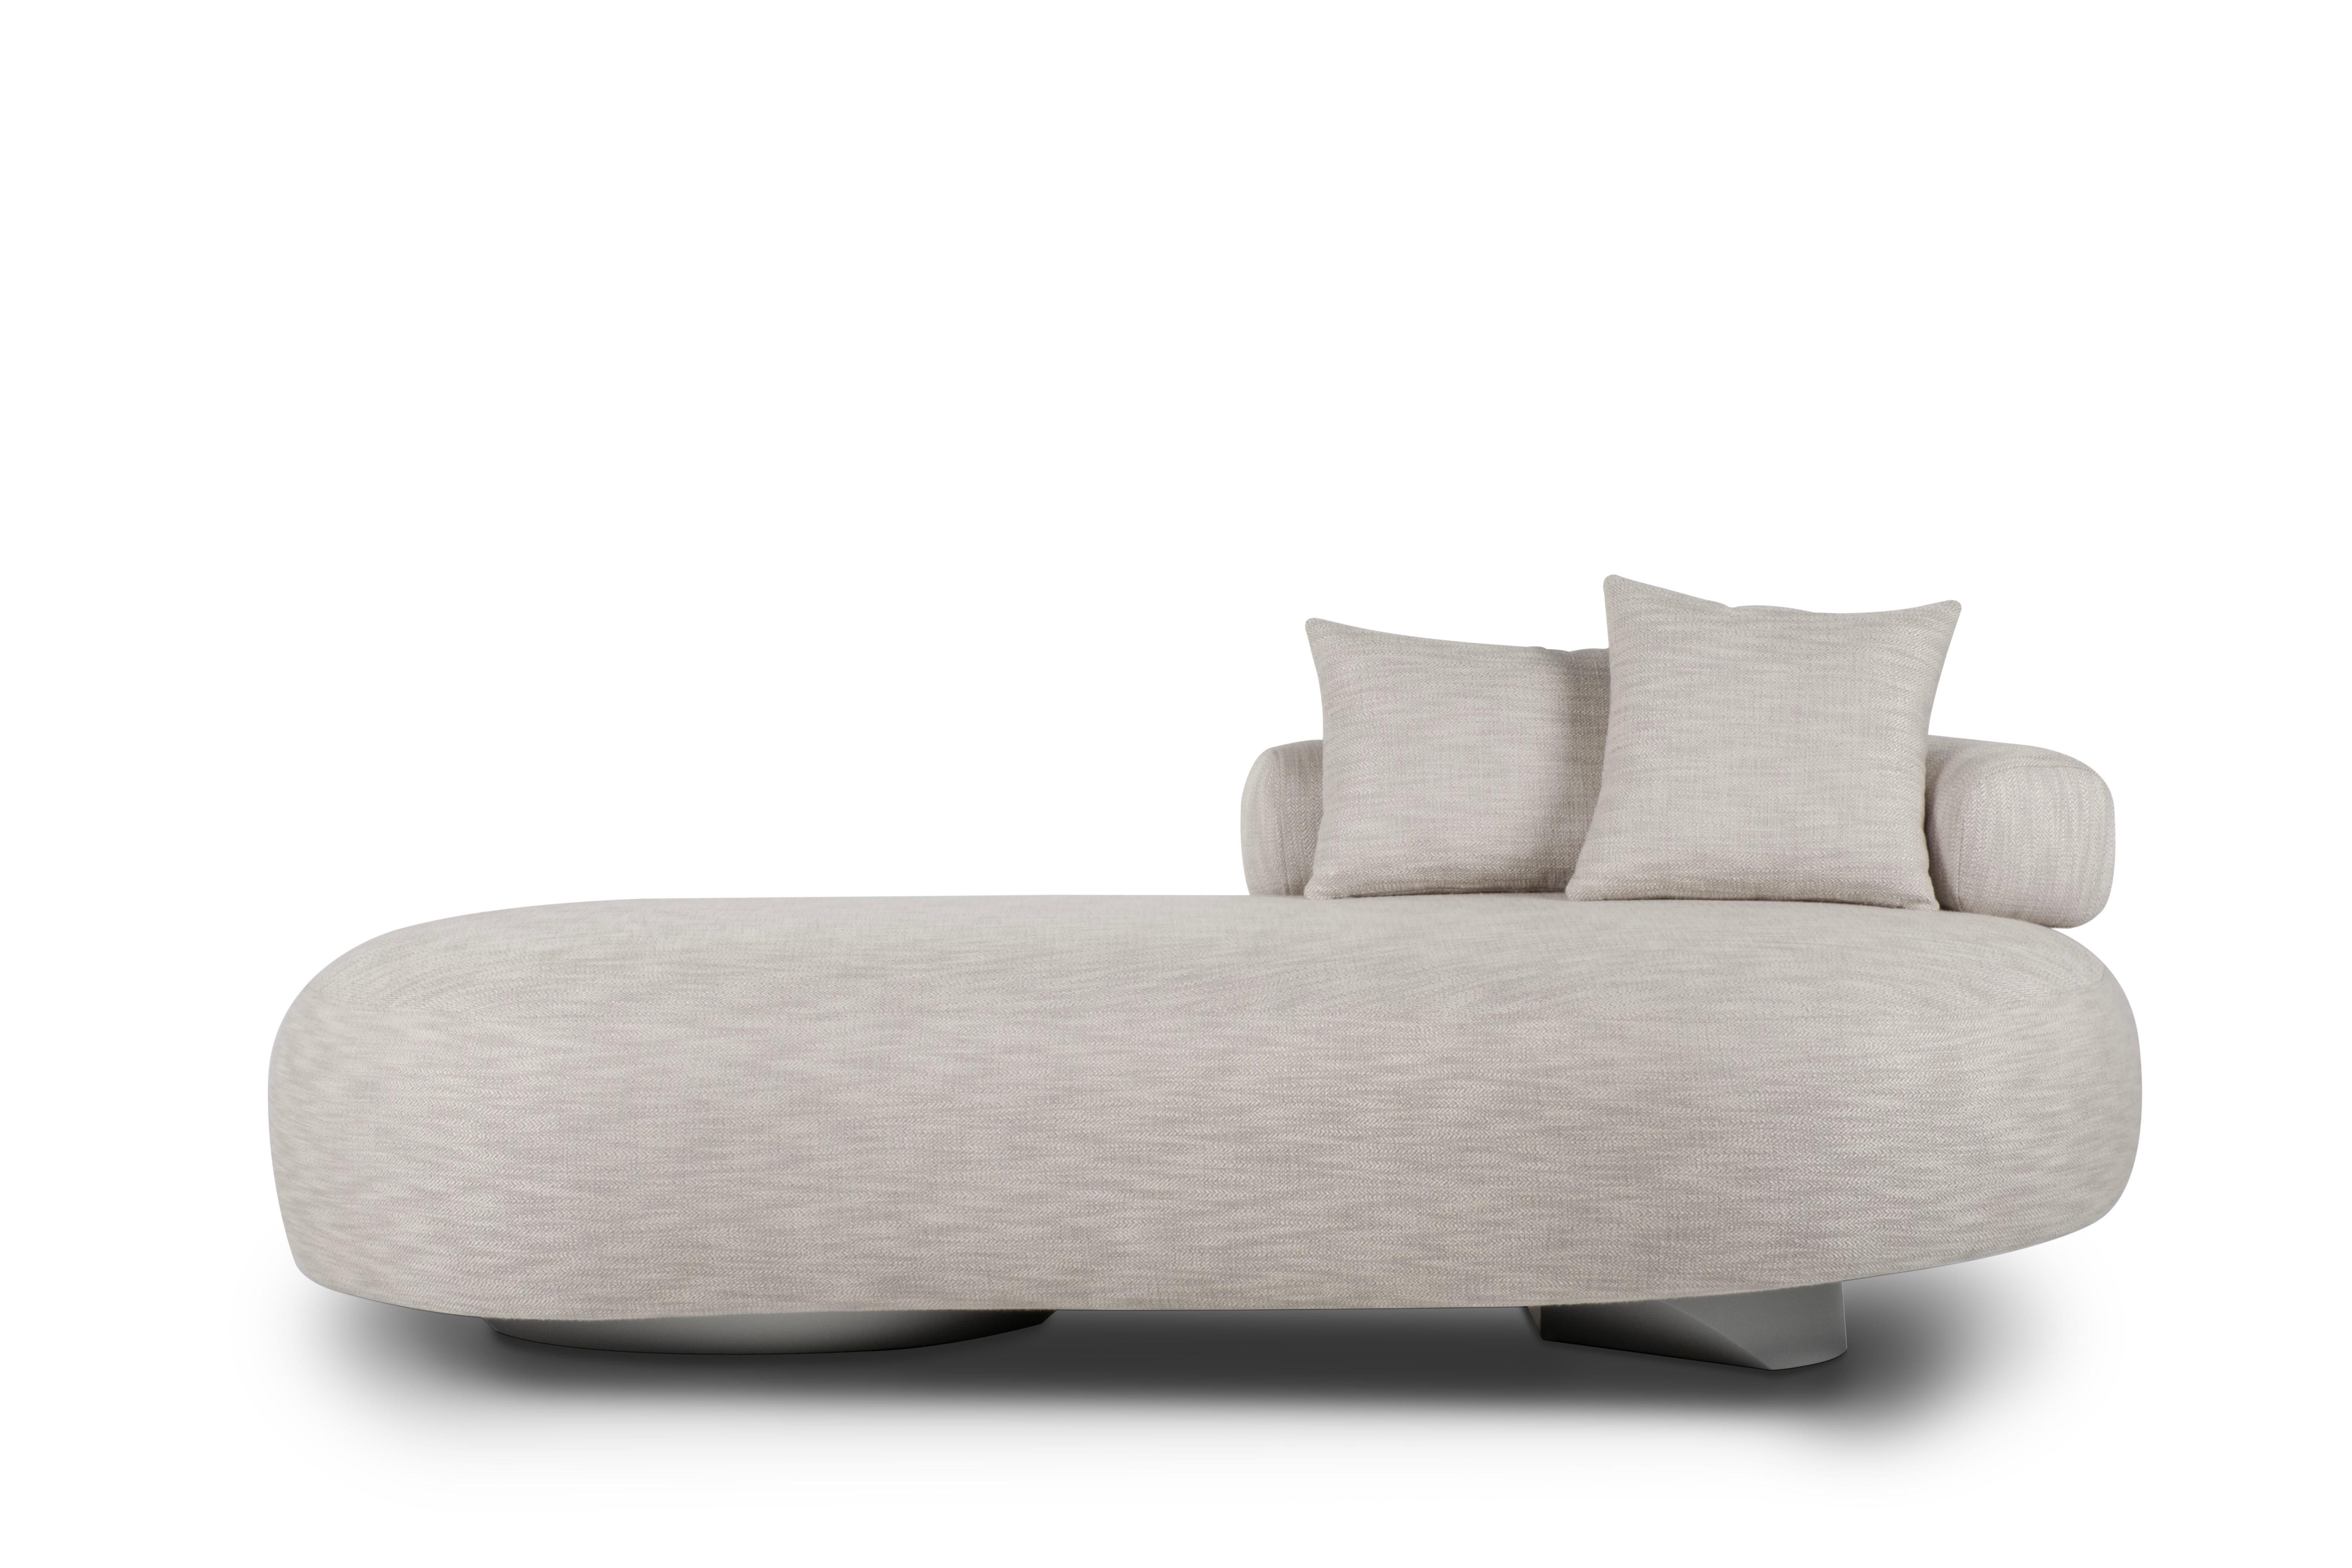 Twins Day Bed, Contemporary Collection, Handcrafted in Portugal - Europe by Greenapple.

Designed by Rute Martins for the Contemporary Collection, the Twins day bed and curved sofa share the same genes, yet each possesses a distinct design, creating